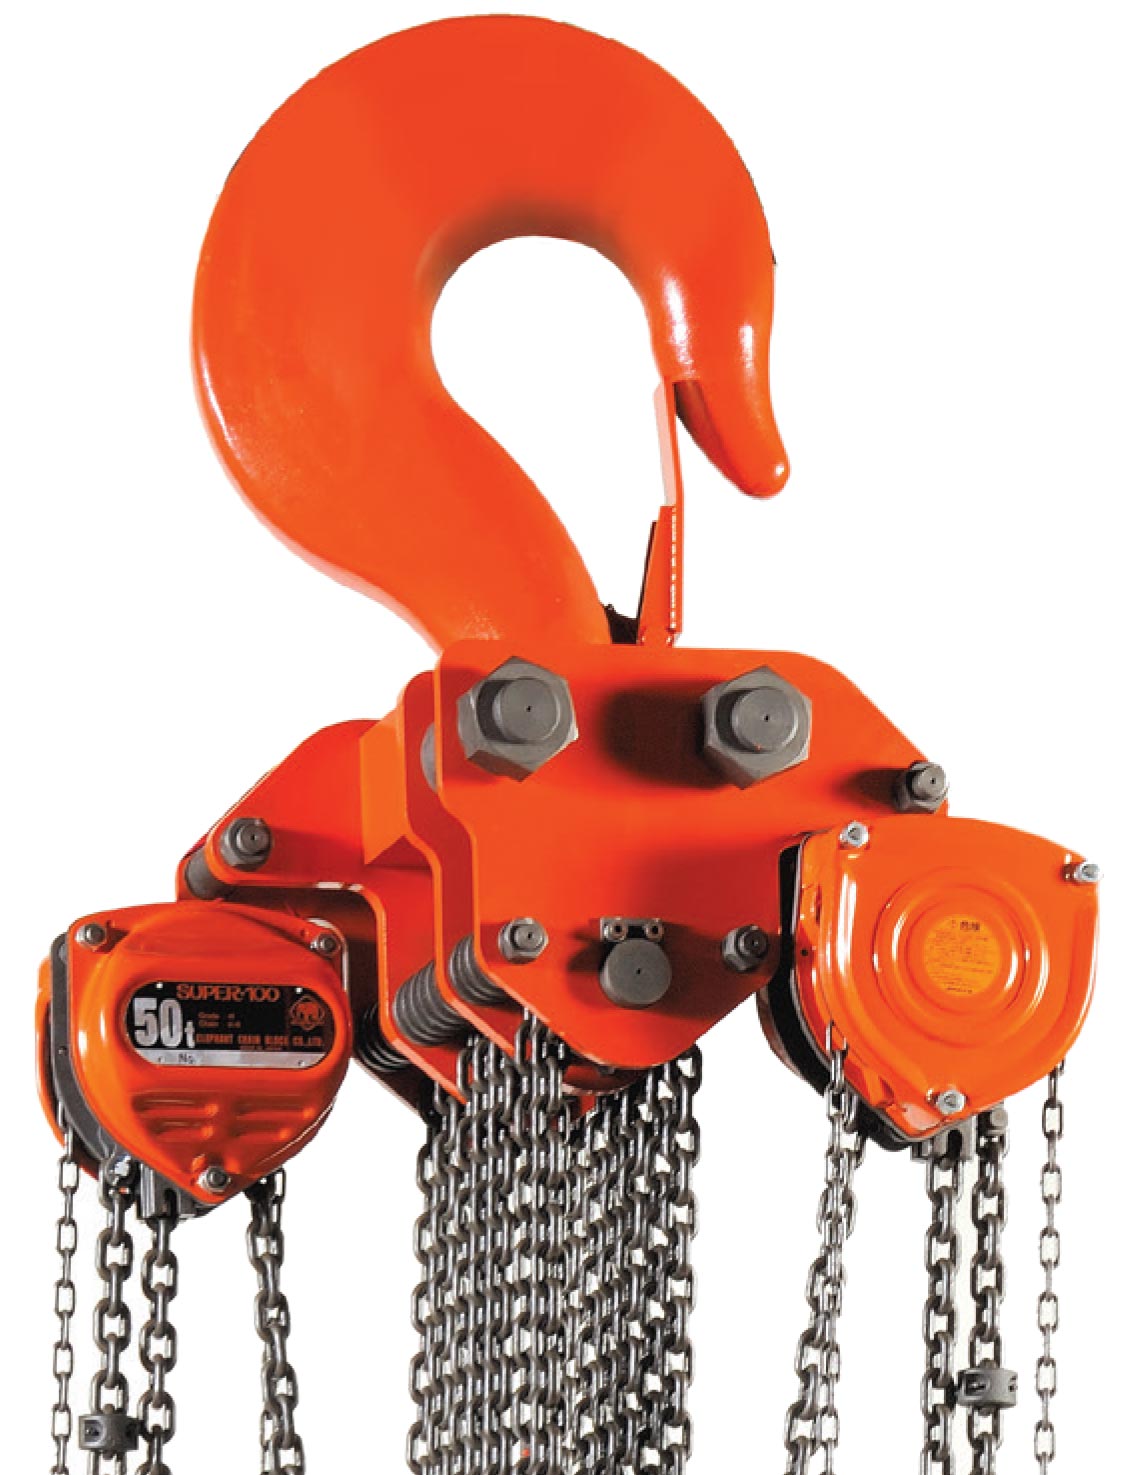 Elephant Lifting KIIOP-10 Hand Chain Hoist with Overload Protection 30 Lift Height Made in Japan 10 ton Capacity 